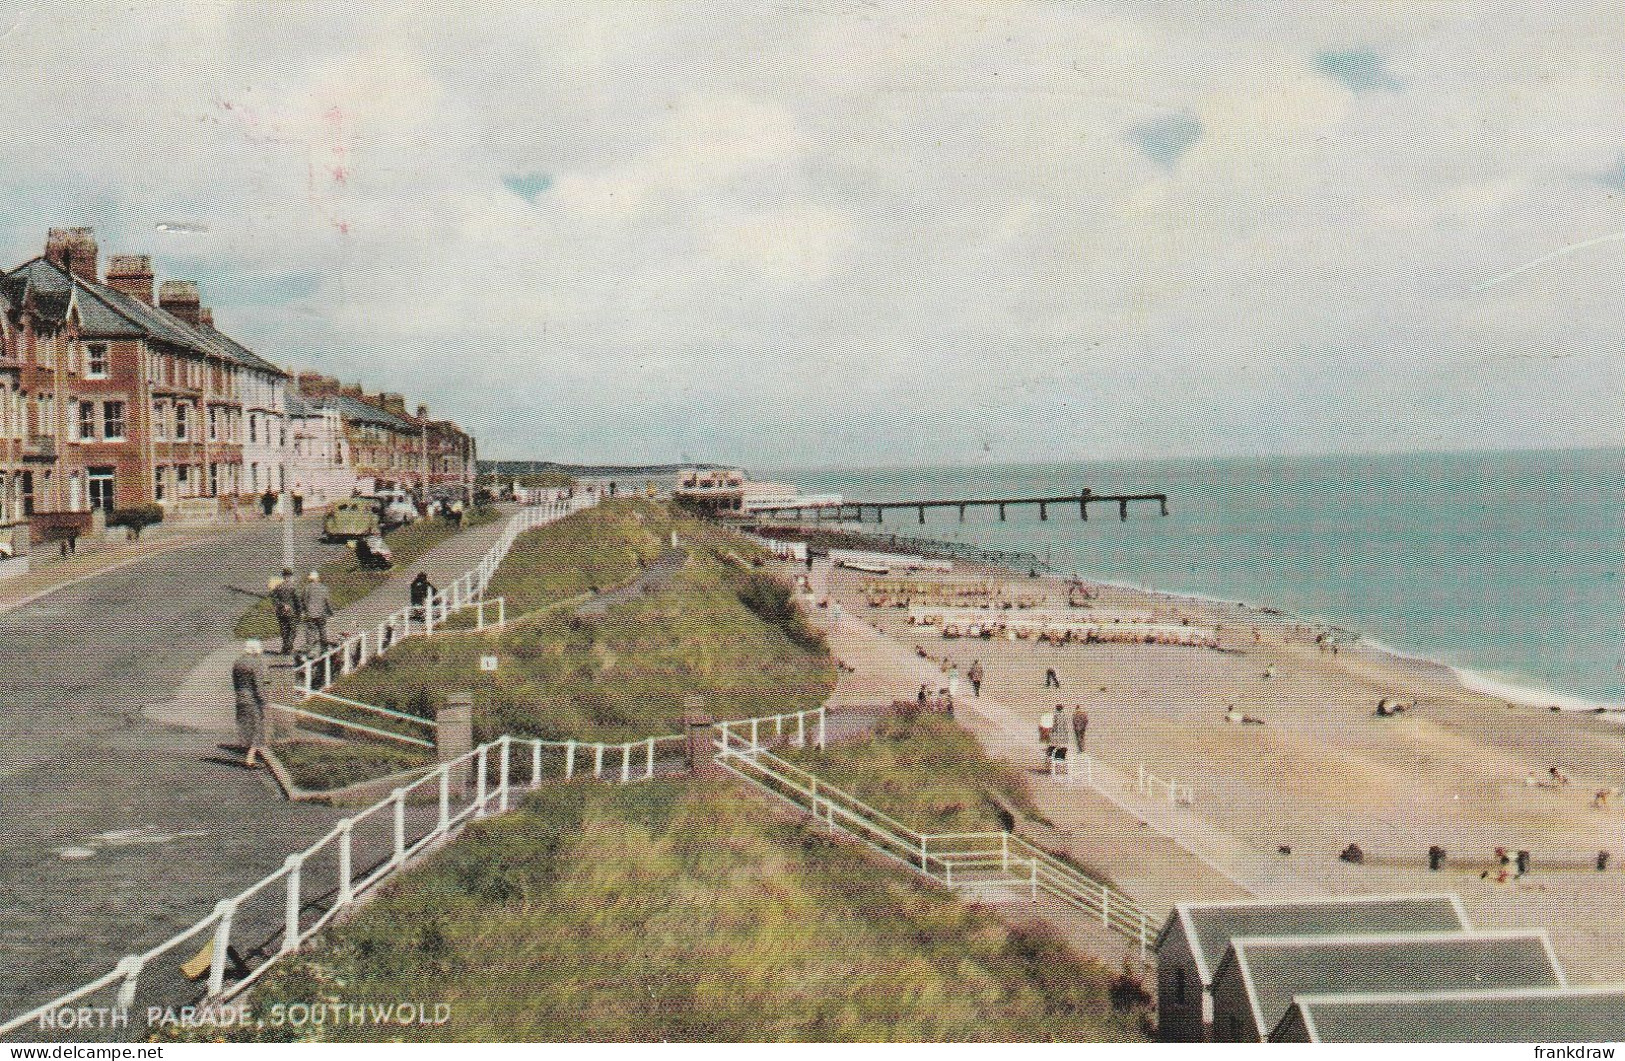 Postcard - North Parade  Southwold - Card No. 1788c - Very Good - Unclassified